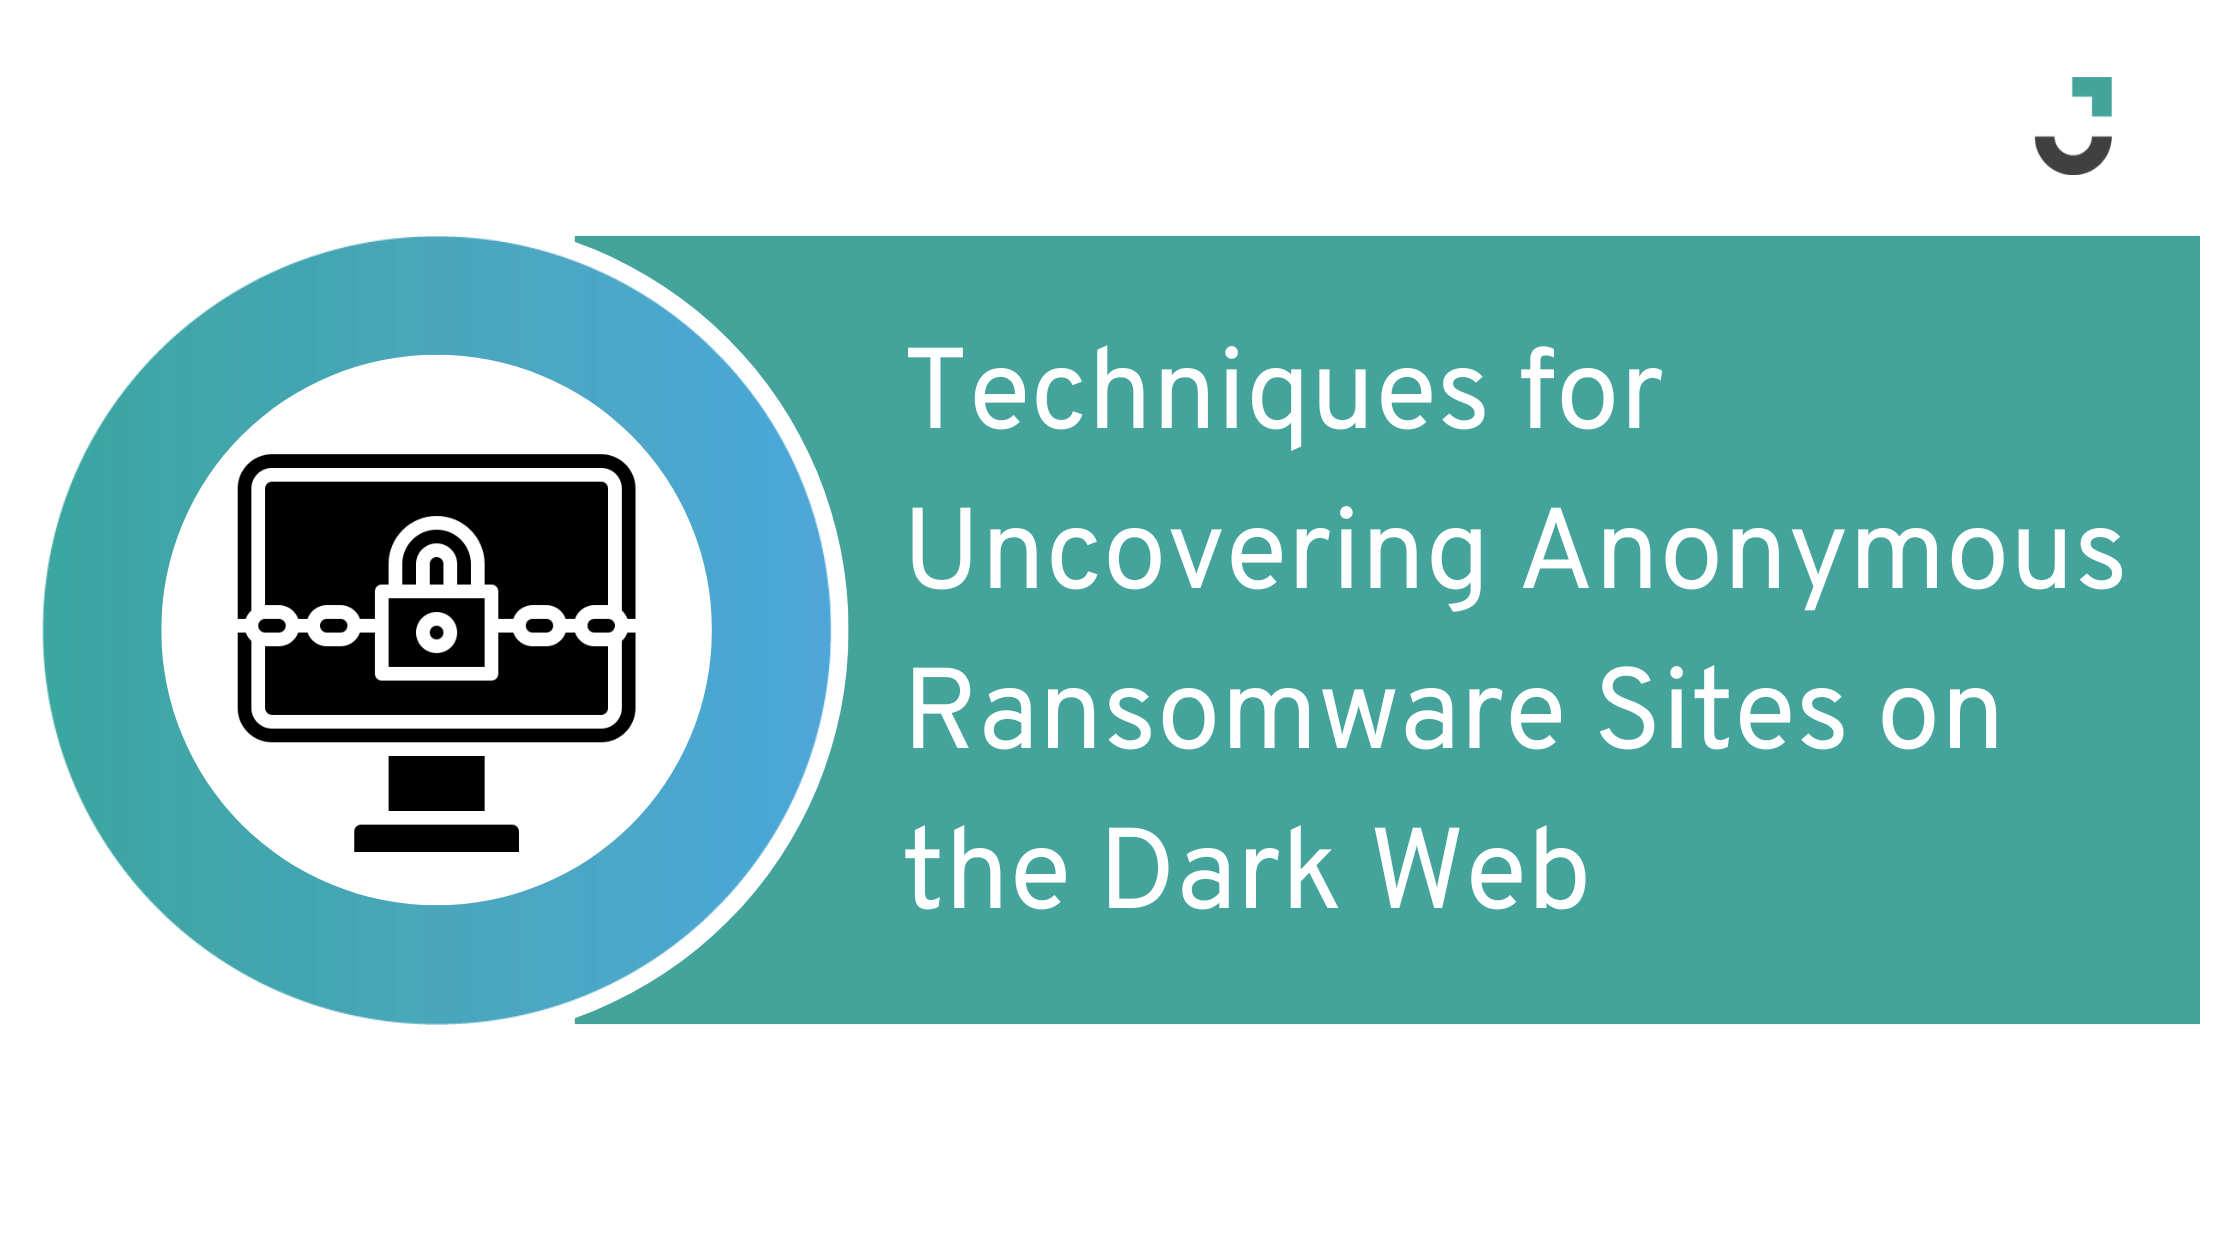 Techniques for Uncovering Anonymous Ransomware Sites on the Dark Web